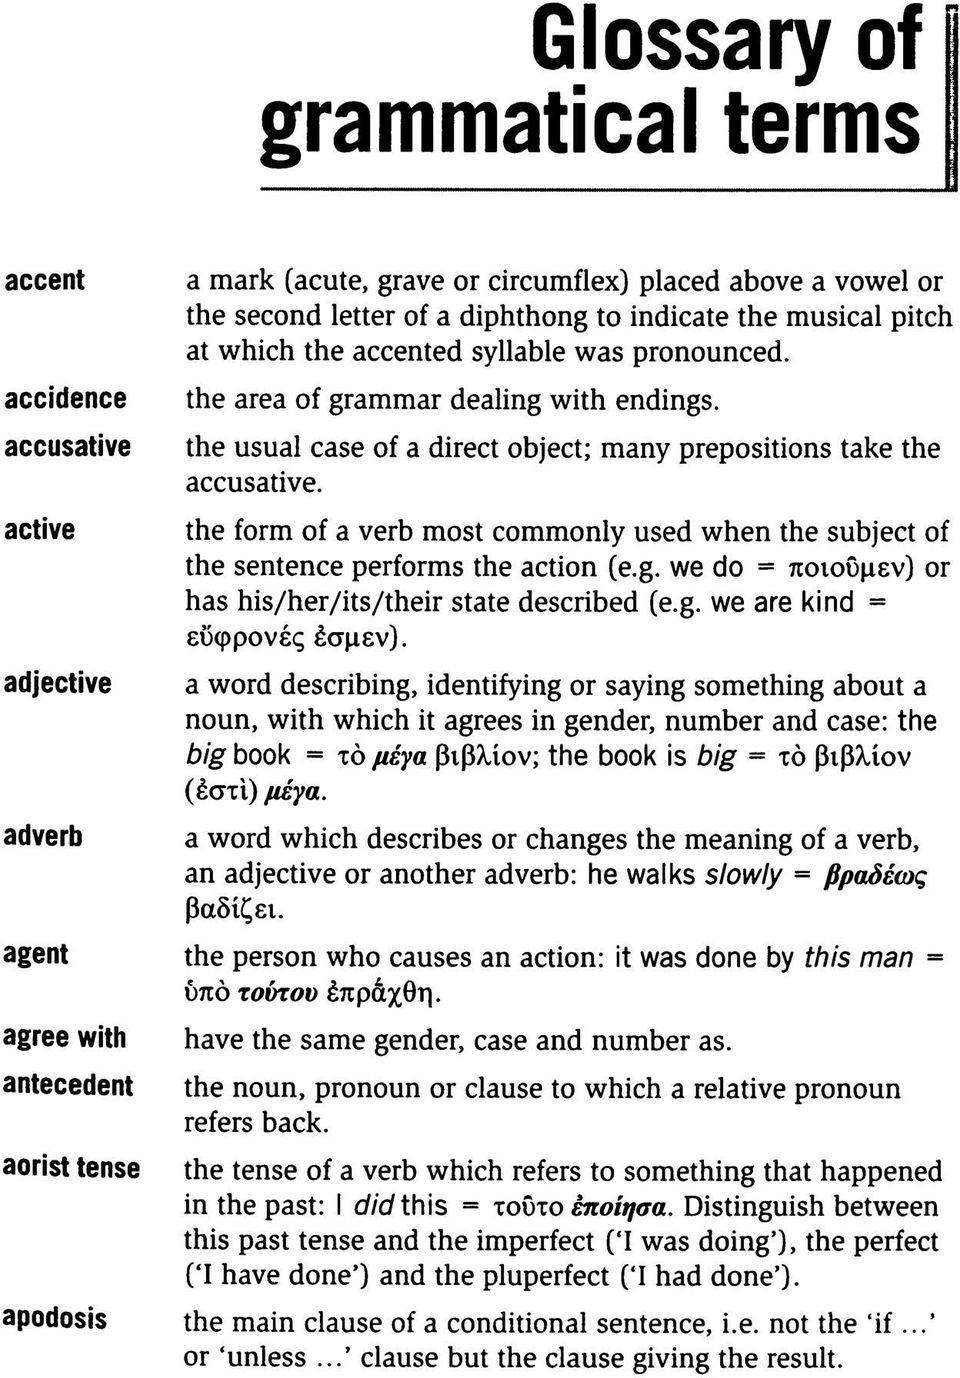 the form of a verb most commonly used when the subject of the sentence performs the action (e.g. we do = ποιοϋμεν) or has his/her/its/their state described (e.g. we are kind = εϋφρονές έσμεν).